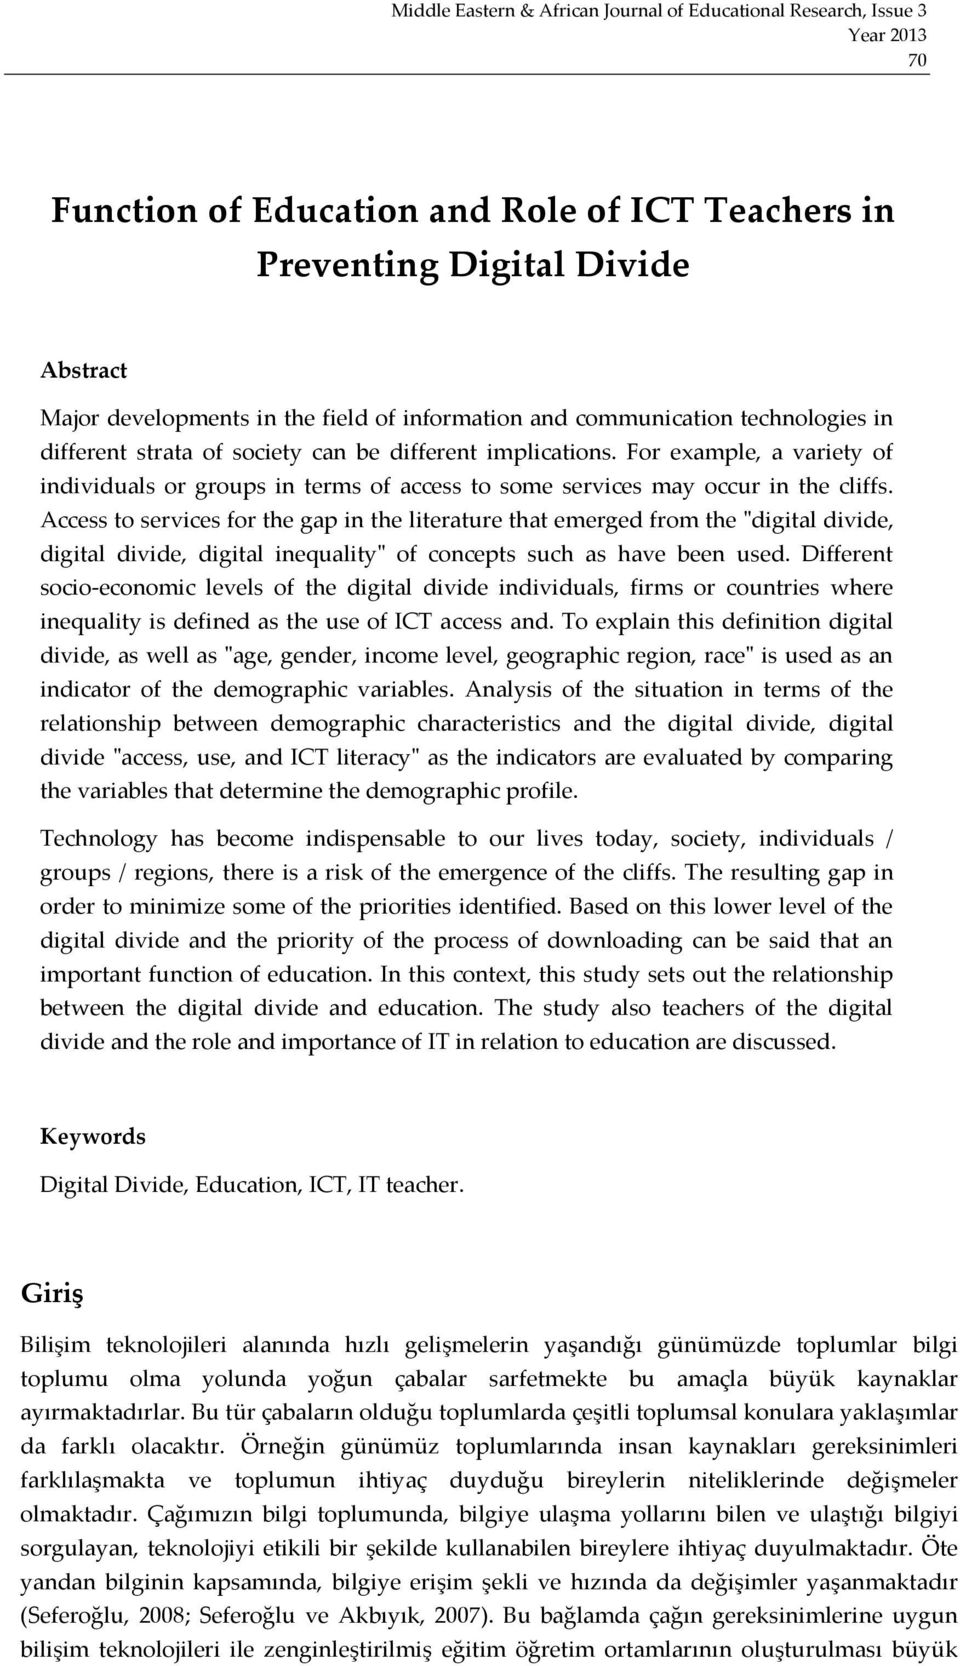 Access to services for the gap in the literature that emerged from the "digital divide digital divide digital inequality" of concepts such as have been used.